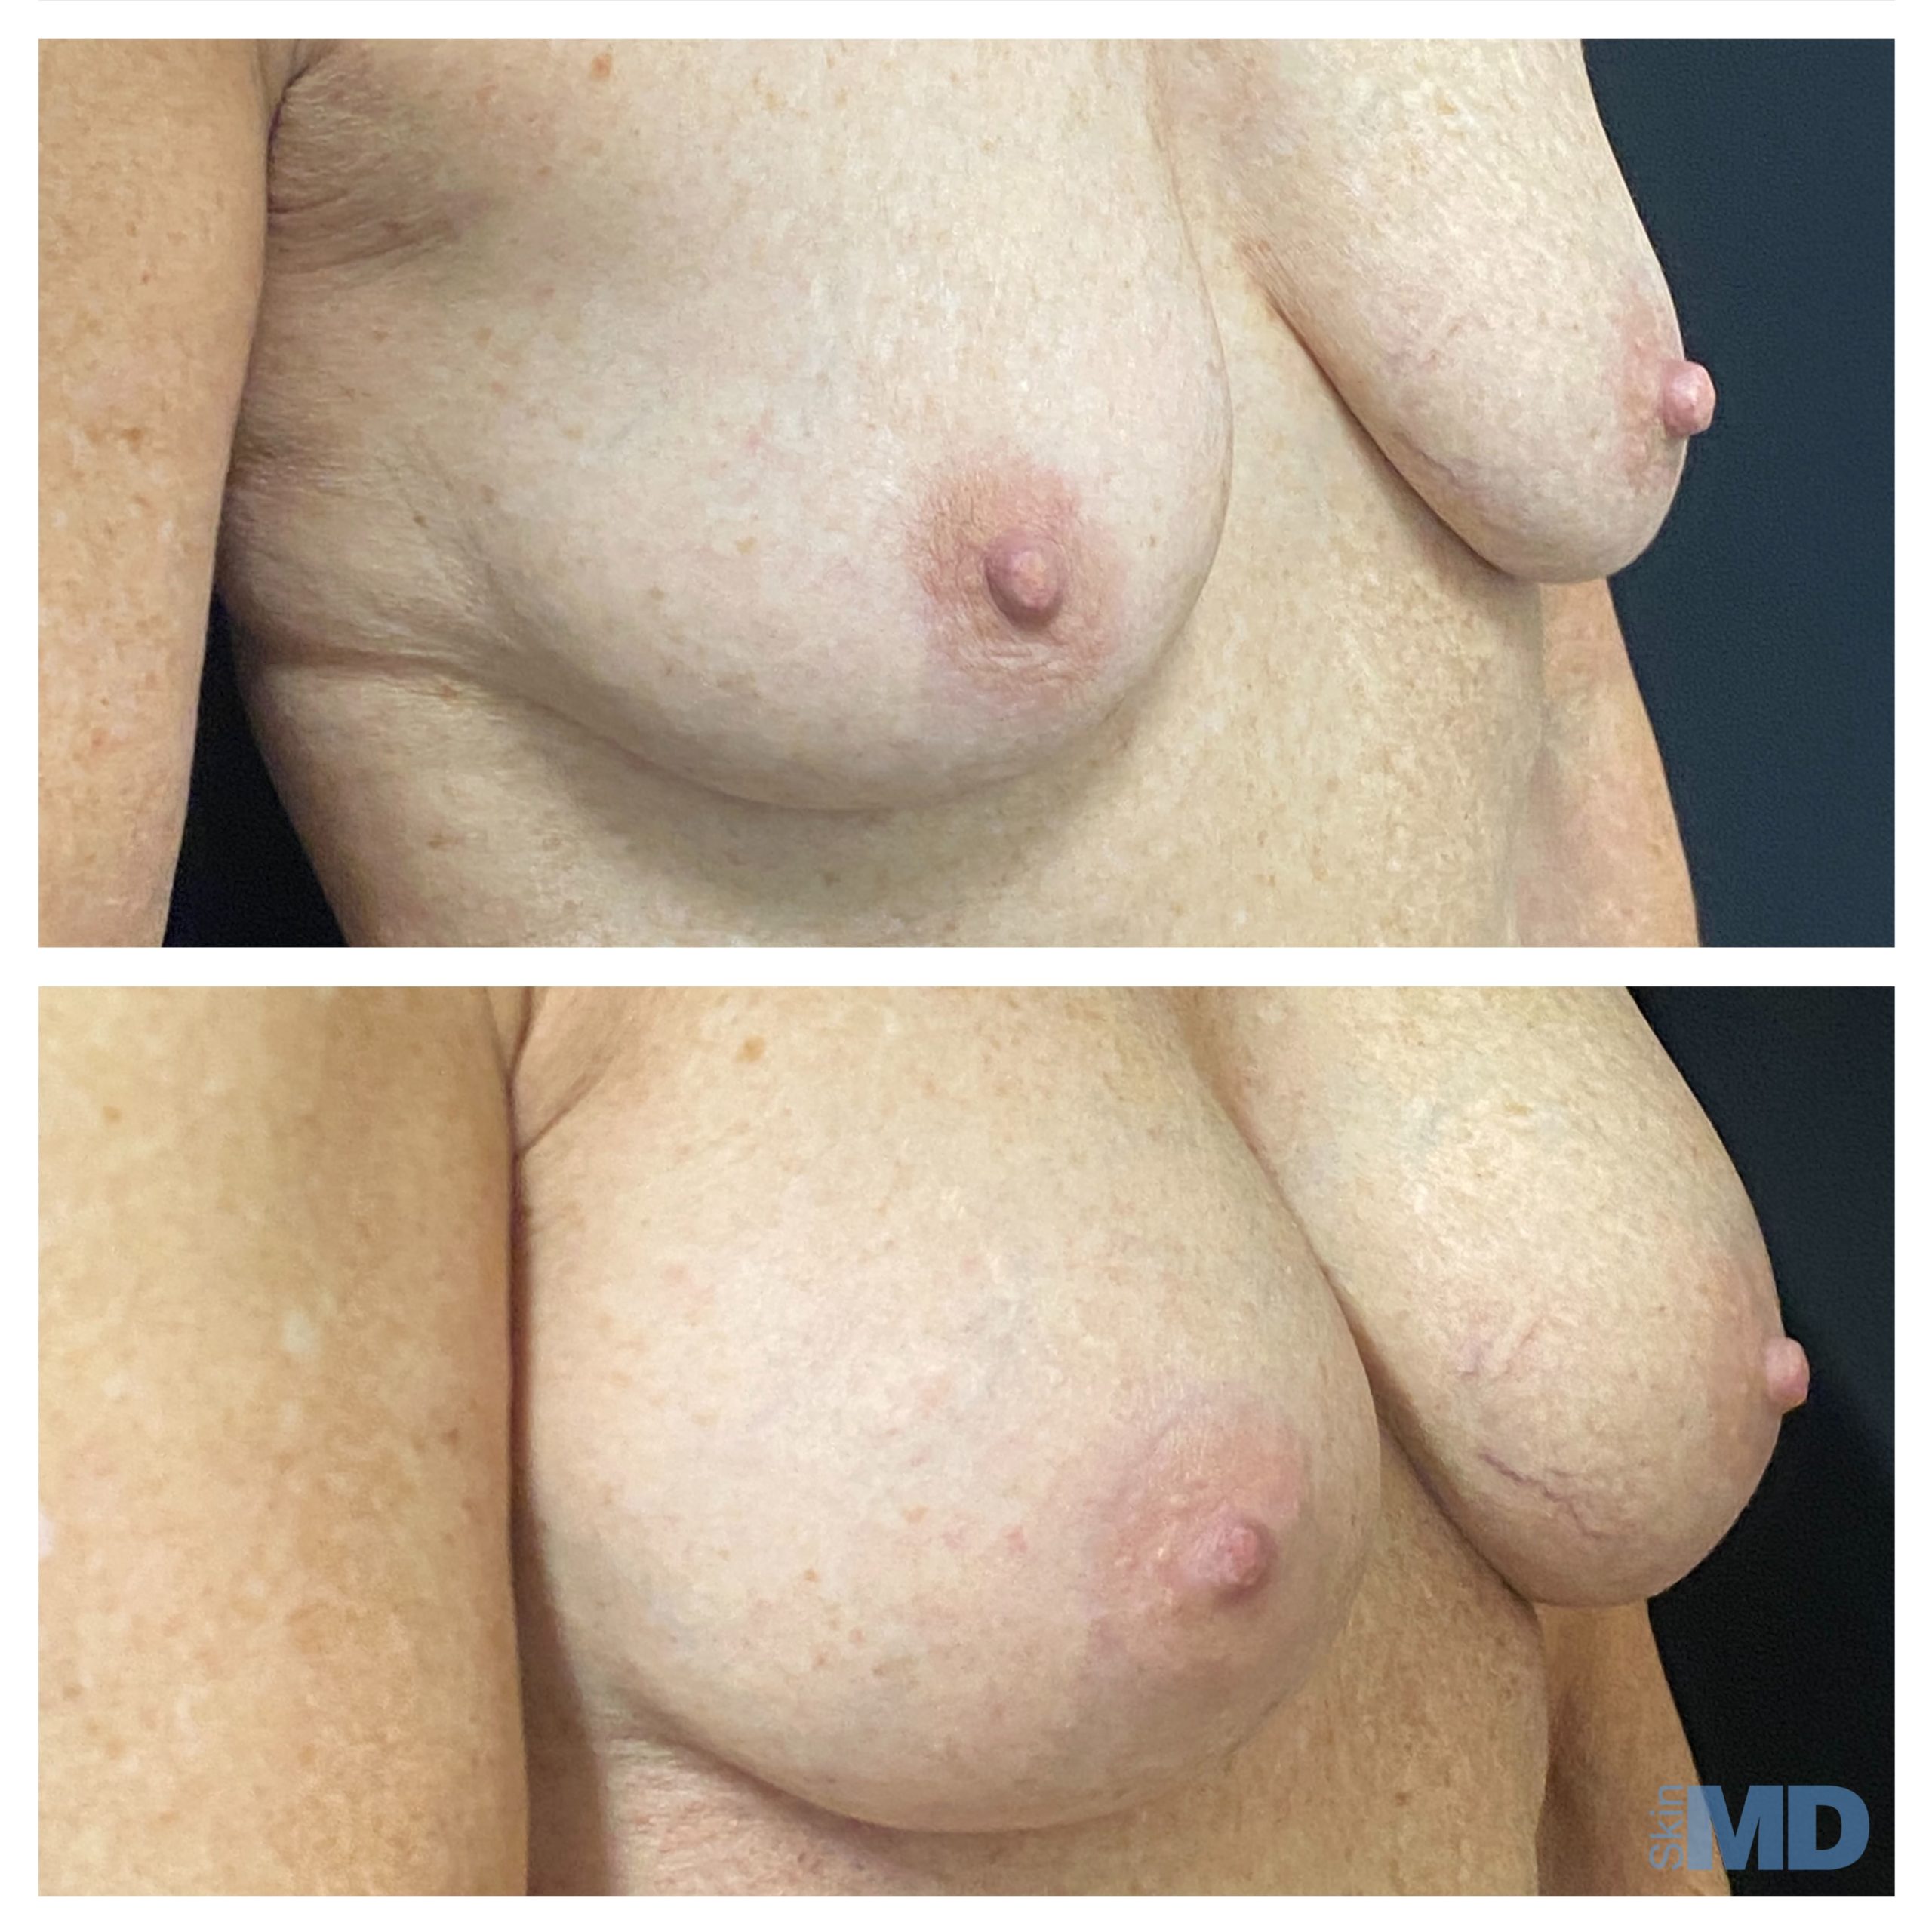 Before and after breast augmentation results